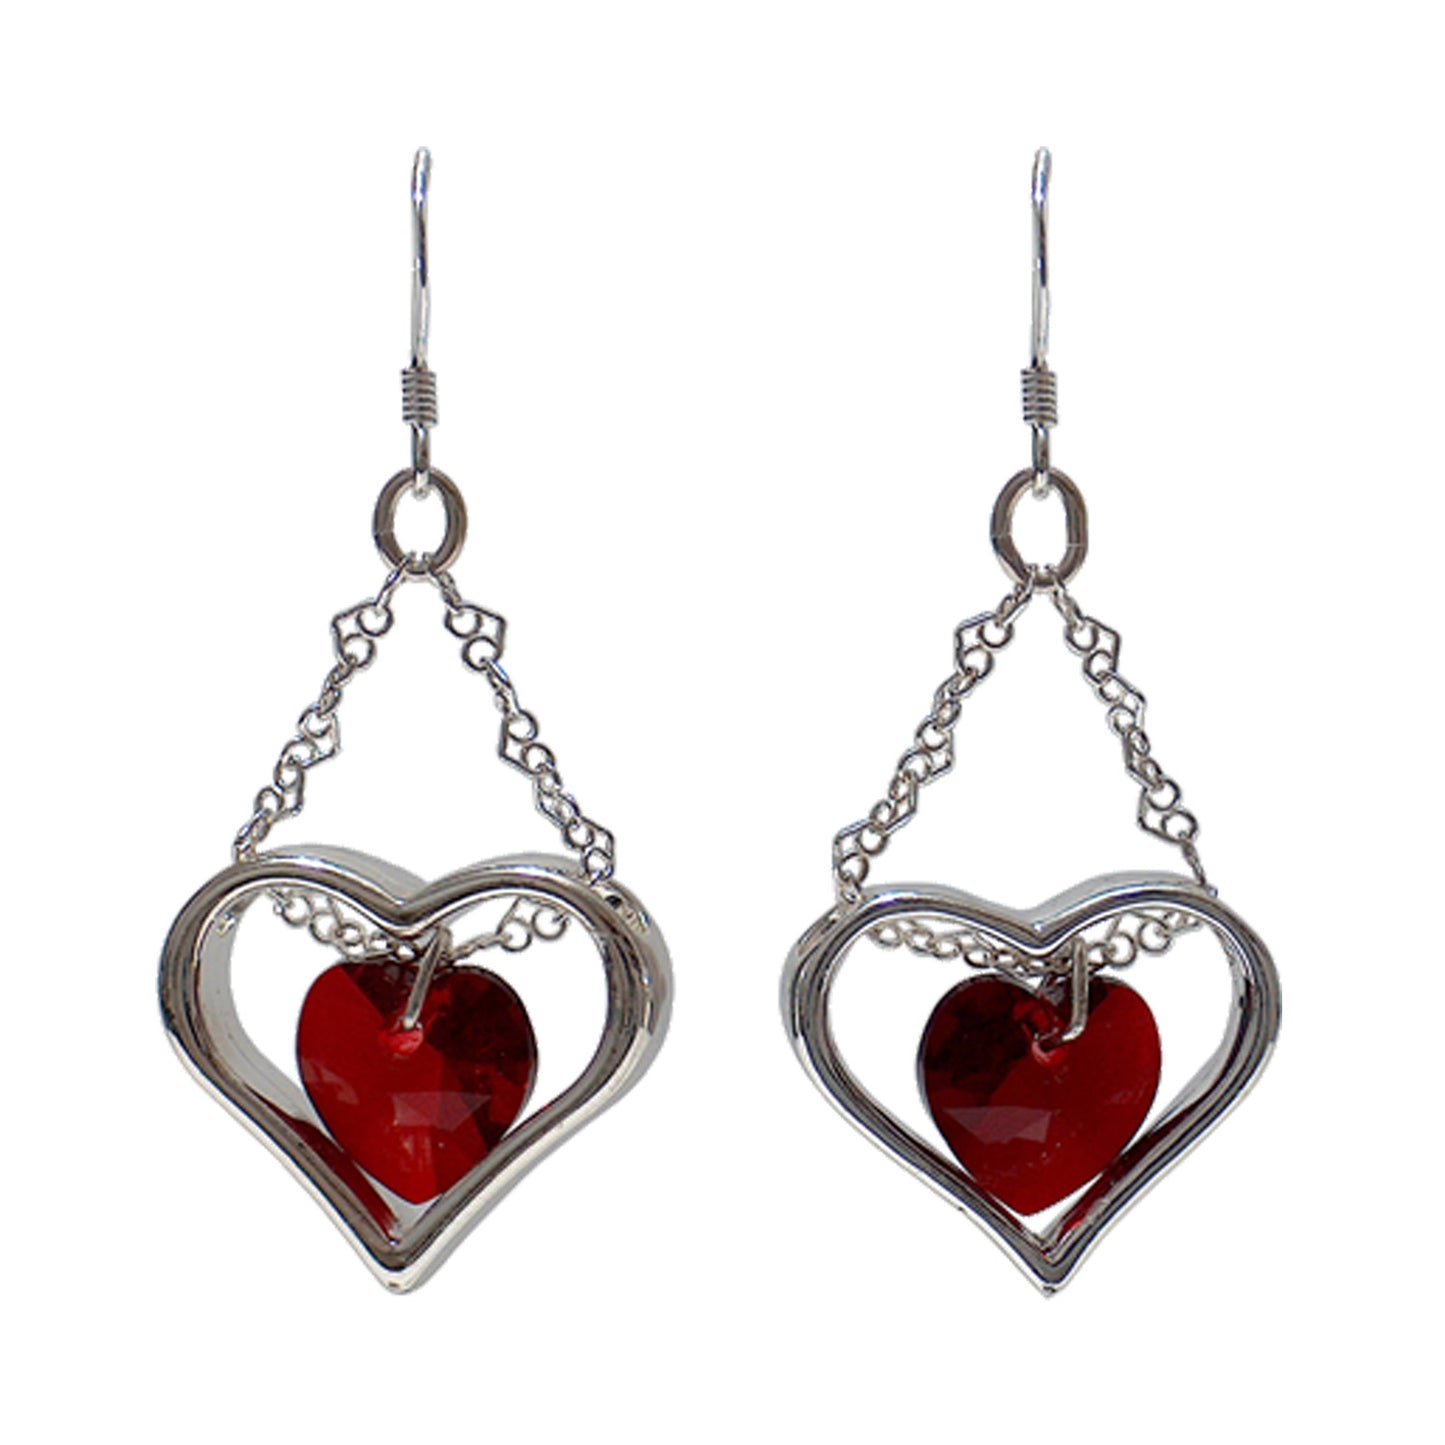 My Heart in Chains Earrings / 45mm length / crystals and silver / sterling silver earwires